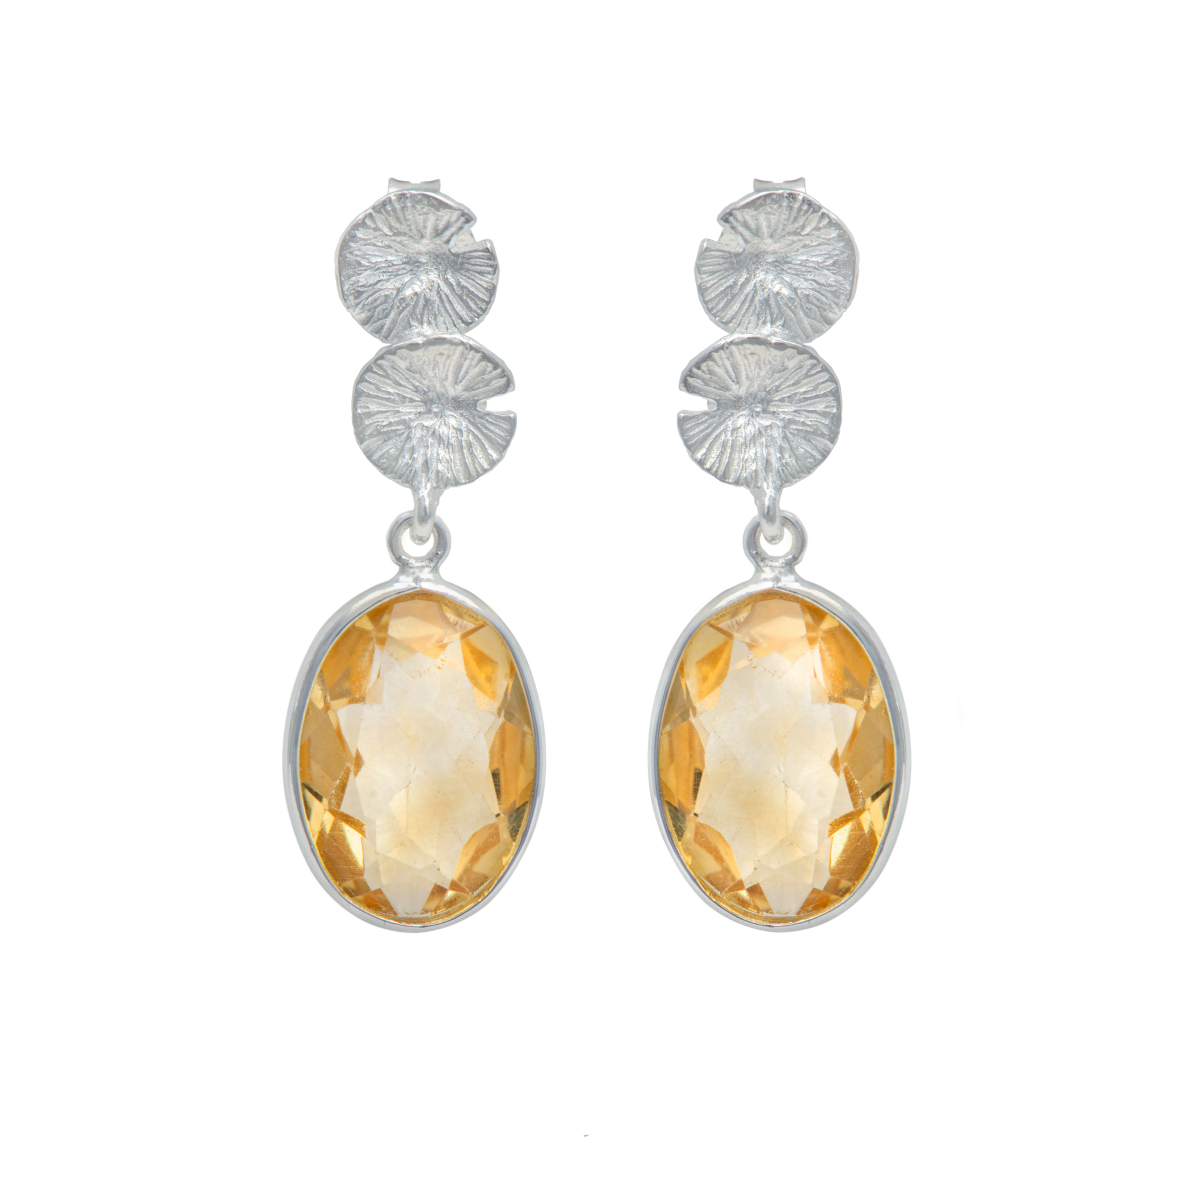 Lily Pad Earrings in Sterling Silver with a Citrine Gemstone Drop